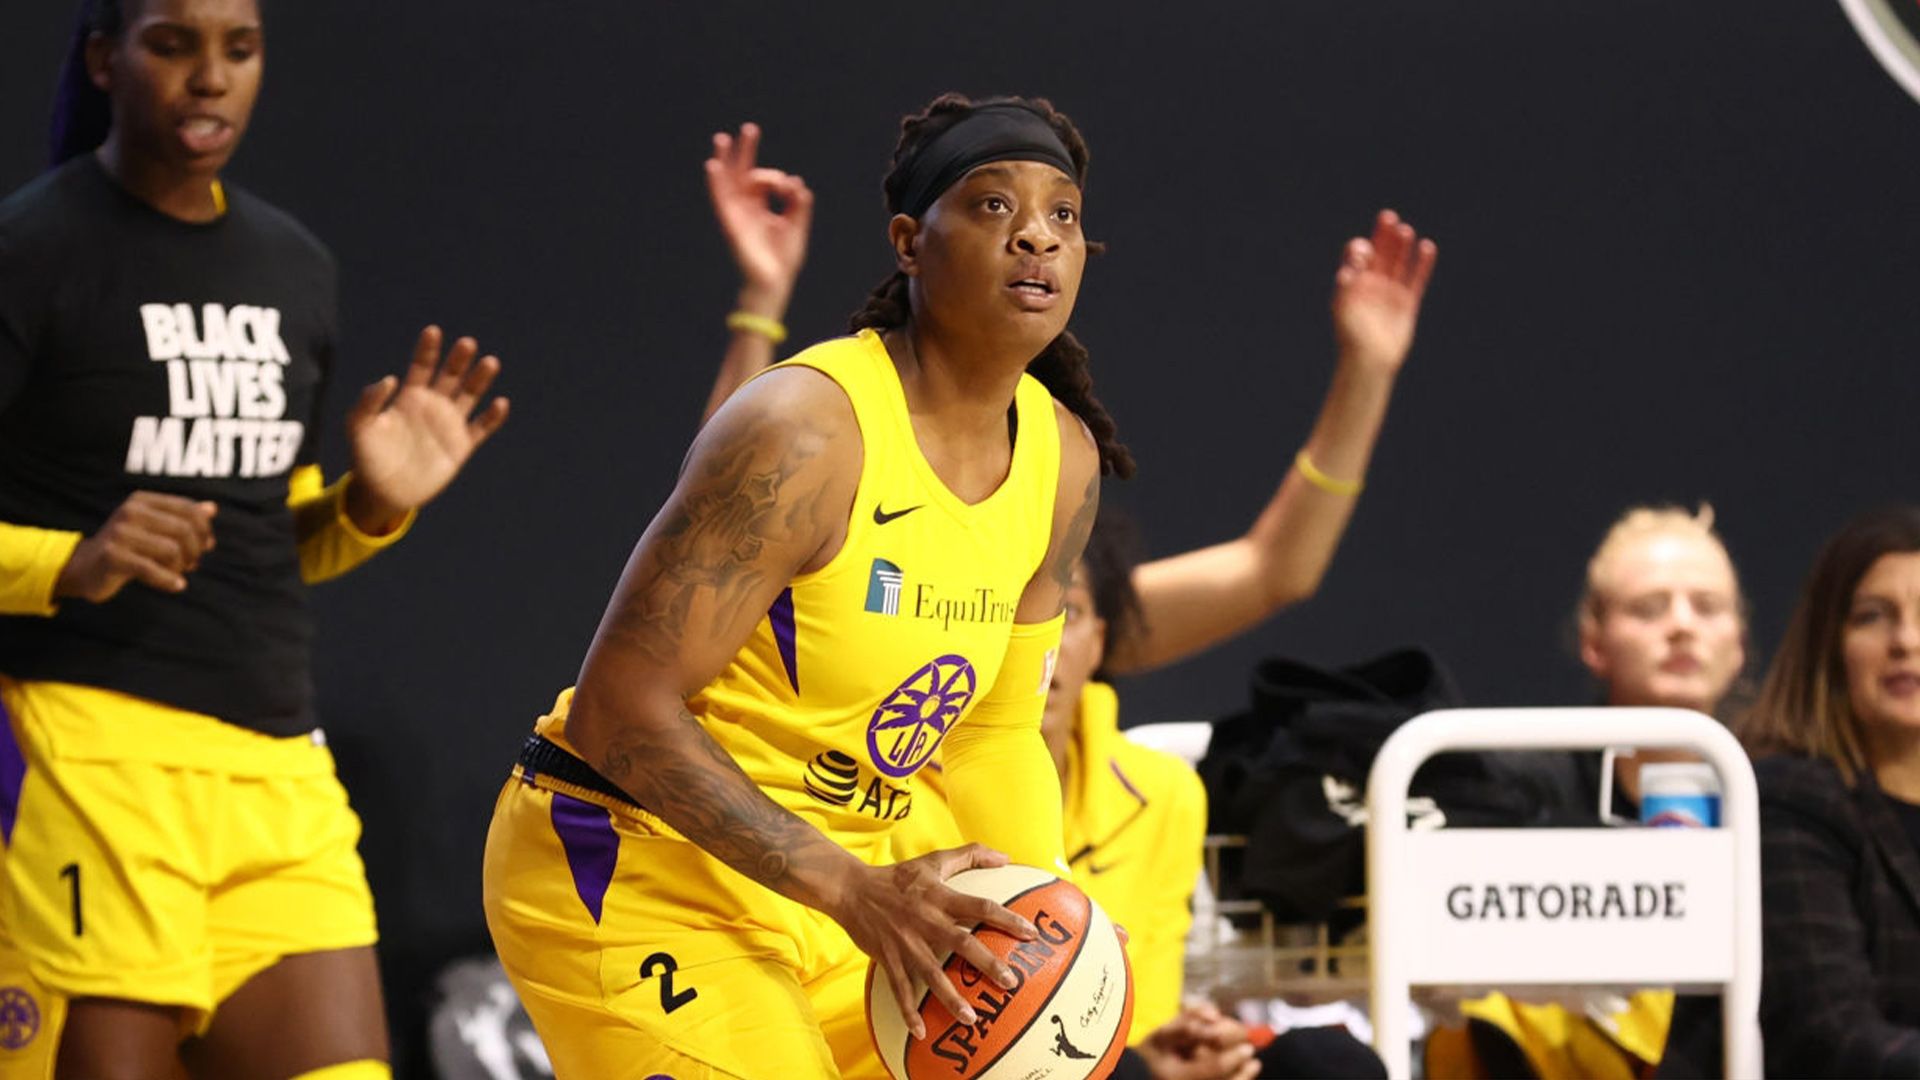 Canes in the WNBA: Week 4